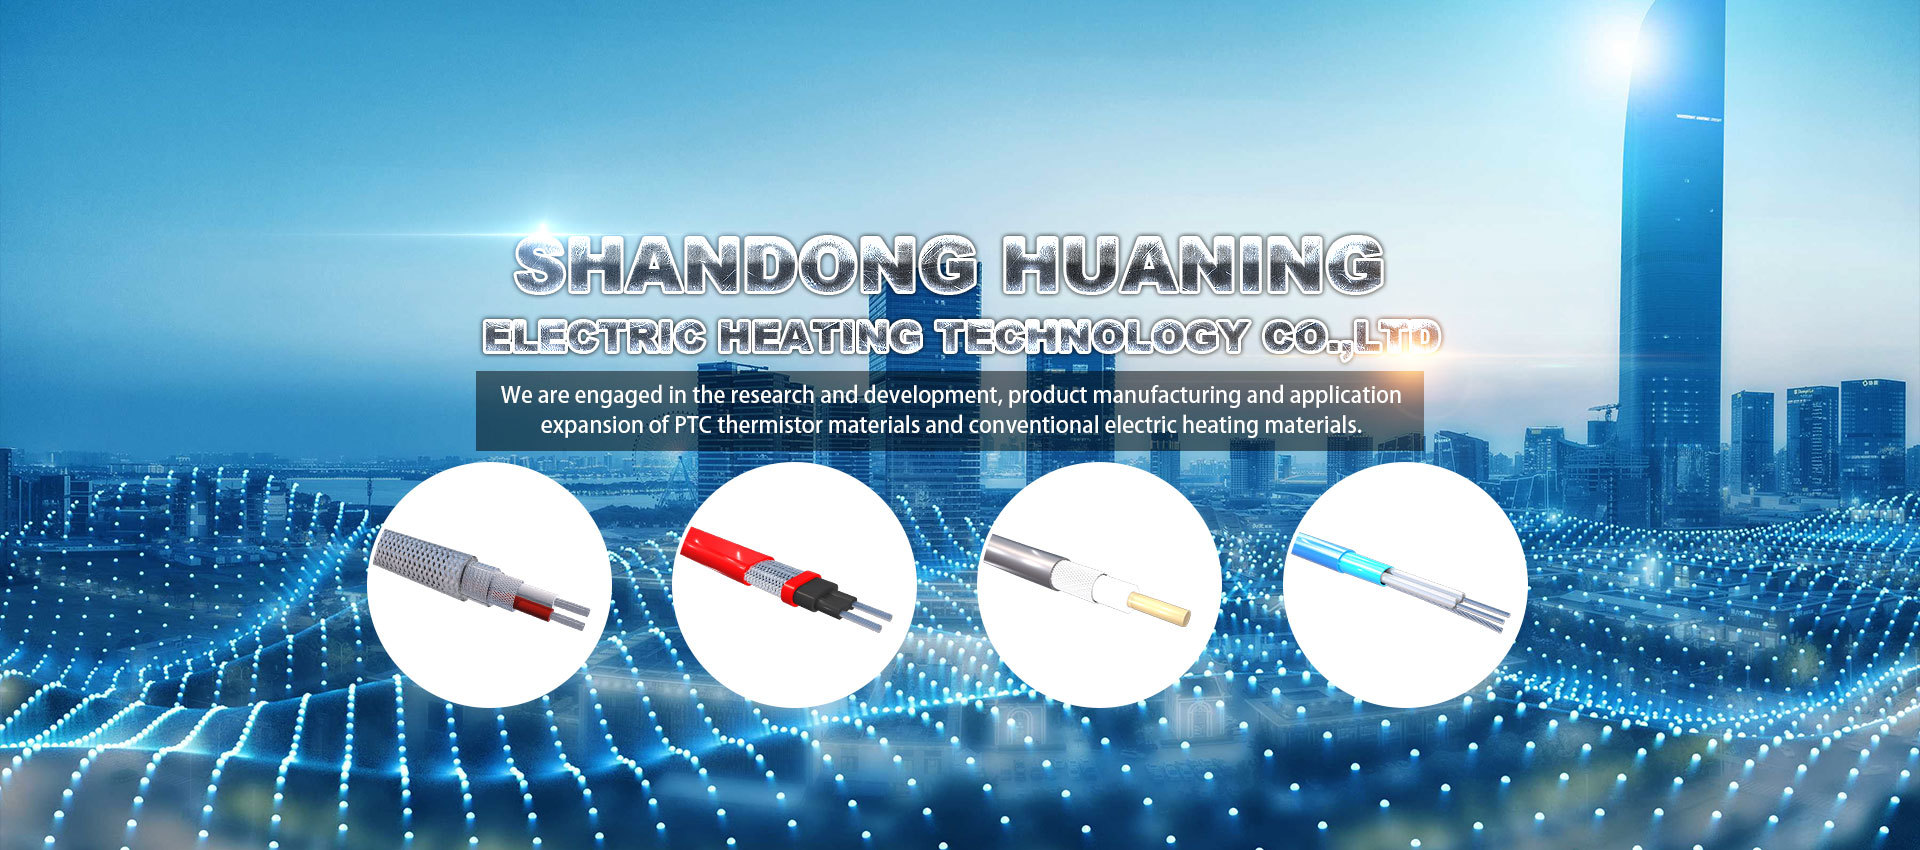 Shandong Huaning Electric Heating Technology Co.,Ltd